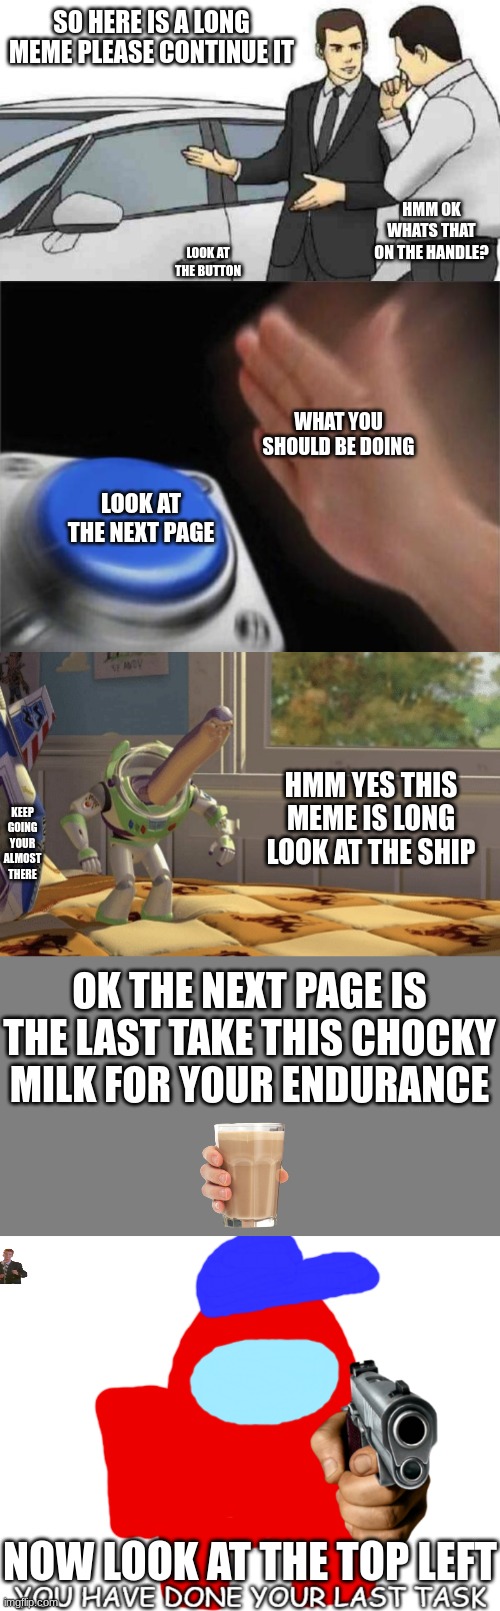 look at the end for a suprise ;) | SO HERE IS A LONG MEME PLEASE CONTINUE IT; HMM OK WHATS THAT ON THE HANDLE? LOOK AT THE BUTTON; WHAT YOU SHOULD BE DOING; LOOK AT THE NEXT PAGE; HMM YES THIS MEME IS LONG LOOK AT THE SHIP; KEEP GOING YOUR ALMOST THERE; OK THE NEXT PAGE IS THE LAST TAKE THIS CHOCKY MILK FOR YOUR ENDURANCE; NOW LOOK AT THE TOP LEFT | image tagged in memes,car salesman slaps roof of car,blank nut button,hmm yes,blank grey,you have done your last task | made w/ Imgflip meme maker